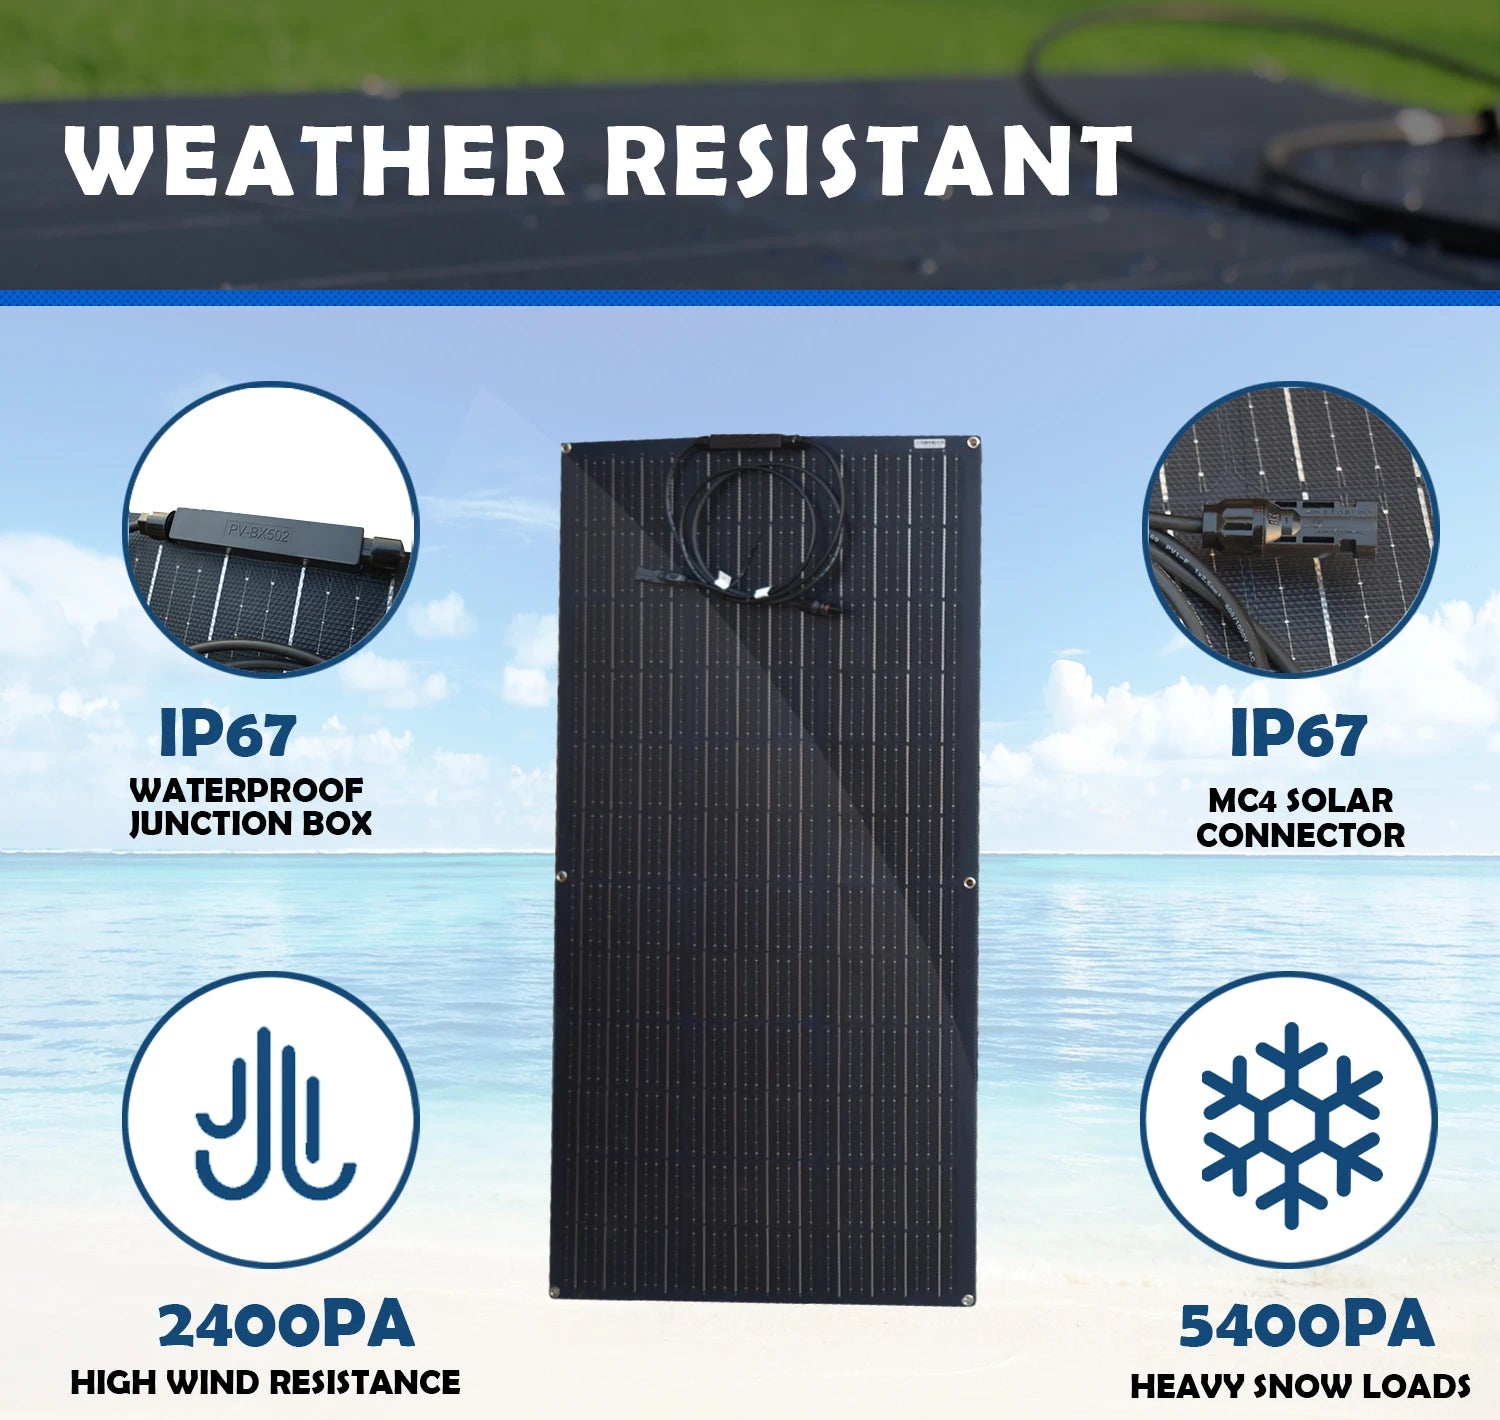 JINGYANG long lasting Semi Flexible solar panel, Durable solar panel for outdoor use in RVs and boats with IP68 waterproofing and weather resistance.